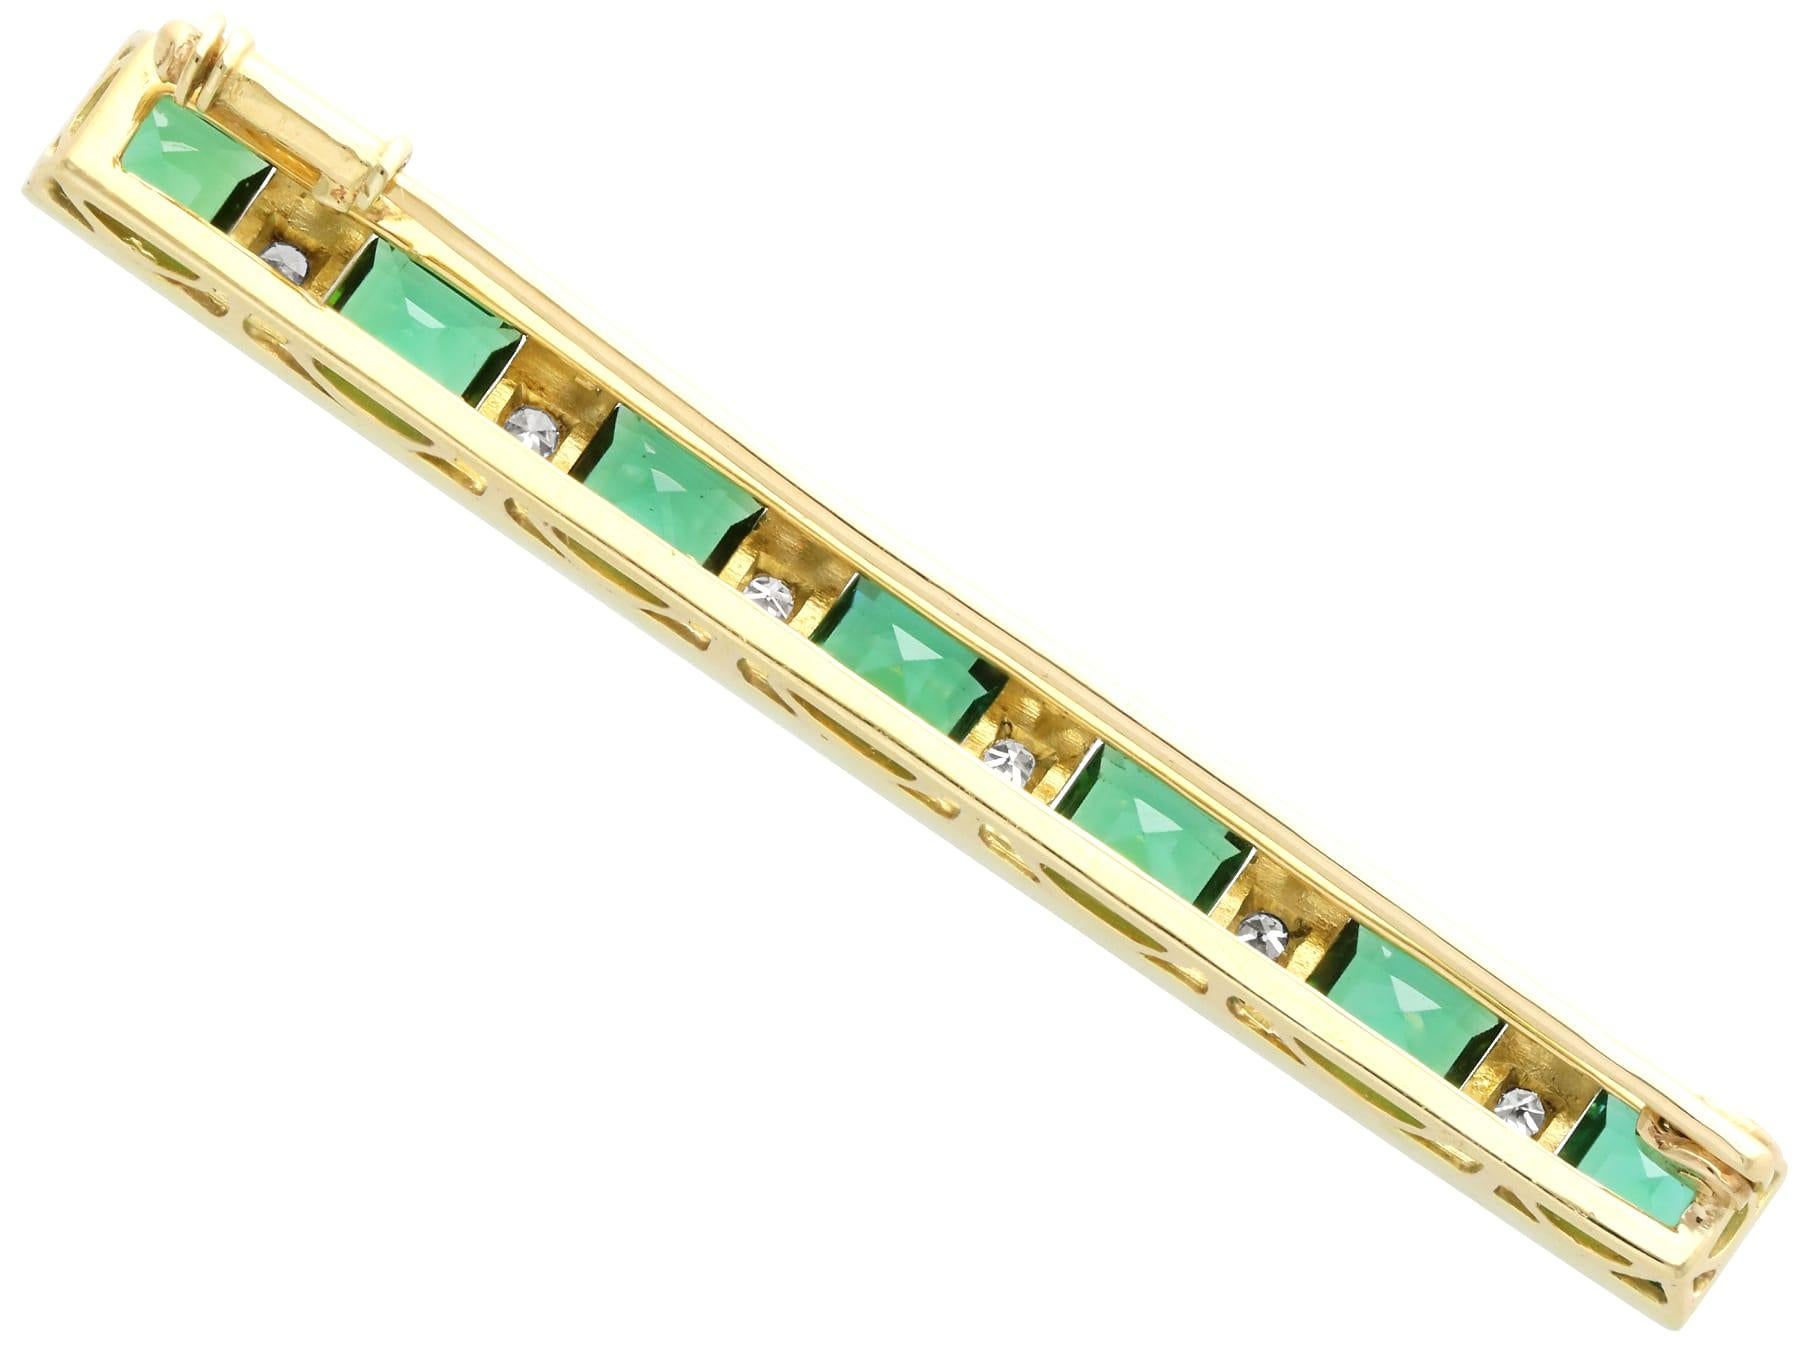 1930s Green Tourmaline Diamond 14k Yellow Gold Bar Brooch In Excellent Condition For Sale In Jesmond, Newcastle Upon Tyne